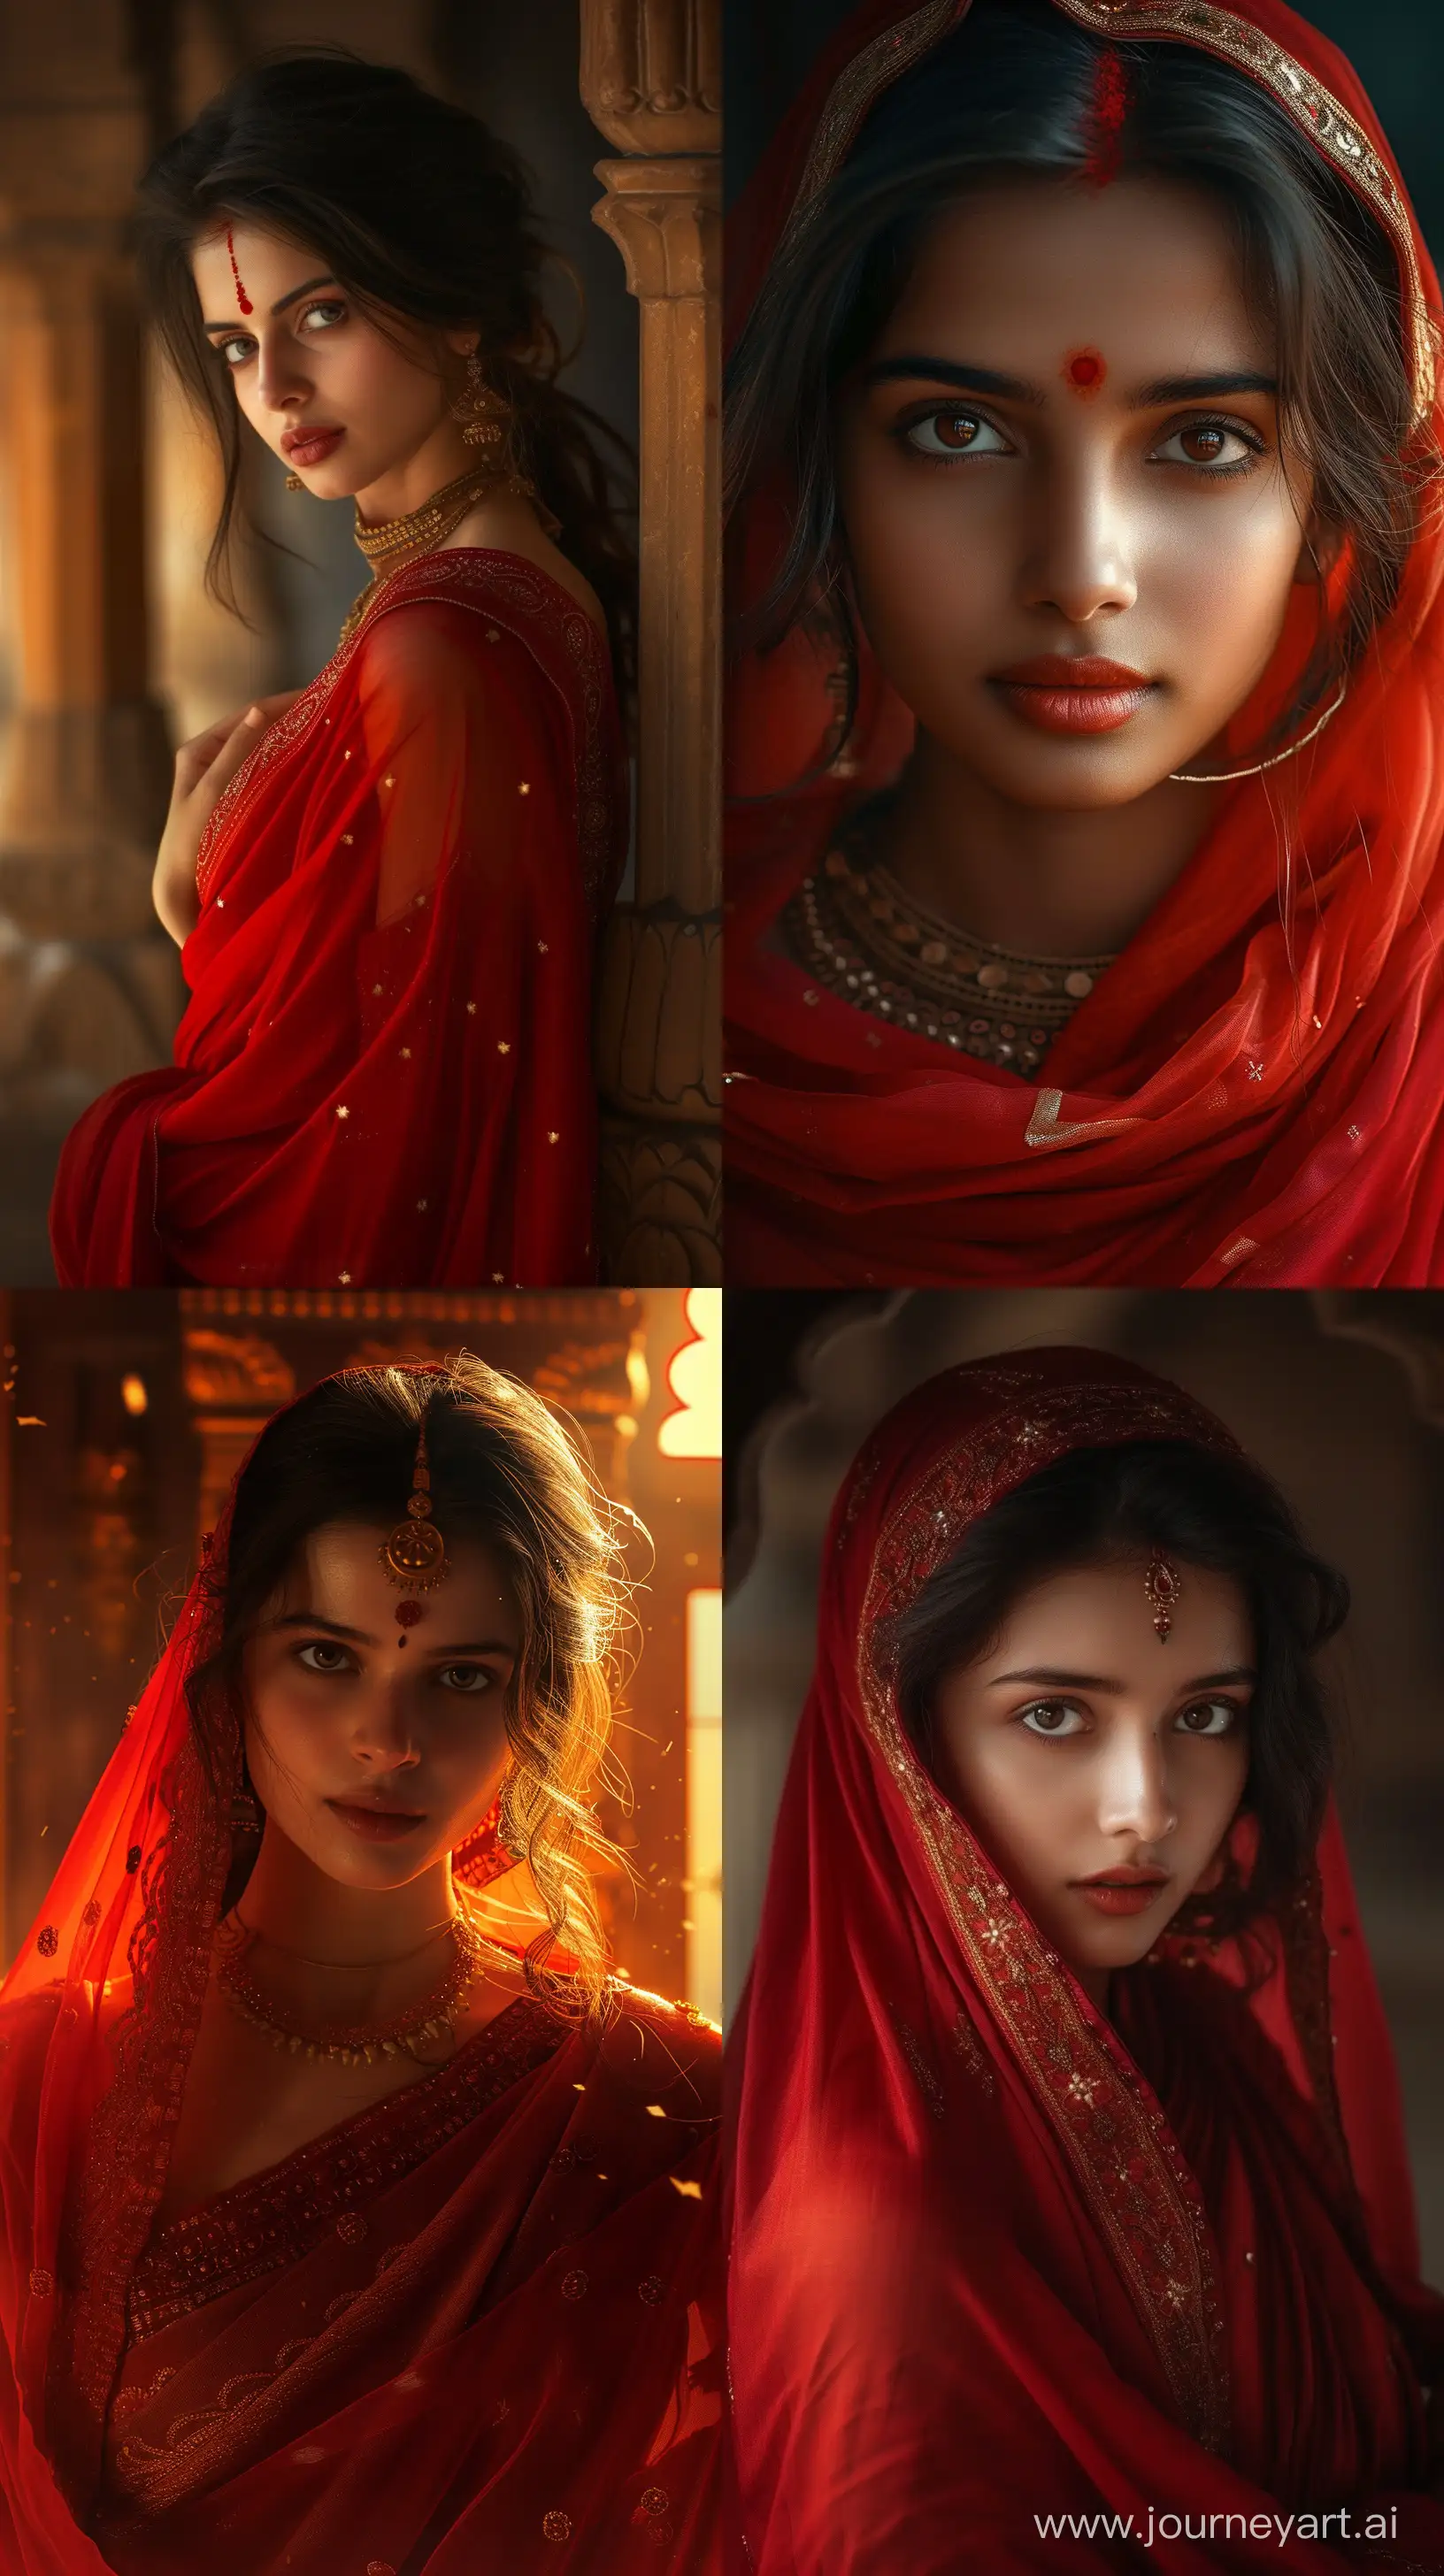 Elegant-Ancient-Indian-Woman-in-Red-Sari-Intricate-Details-and-Dim-Lighting